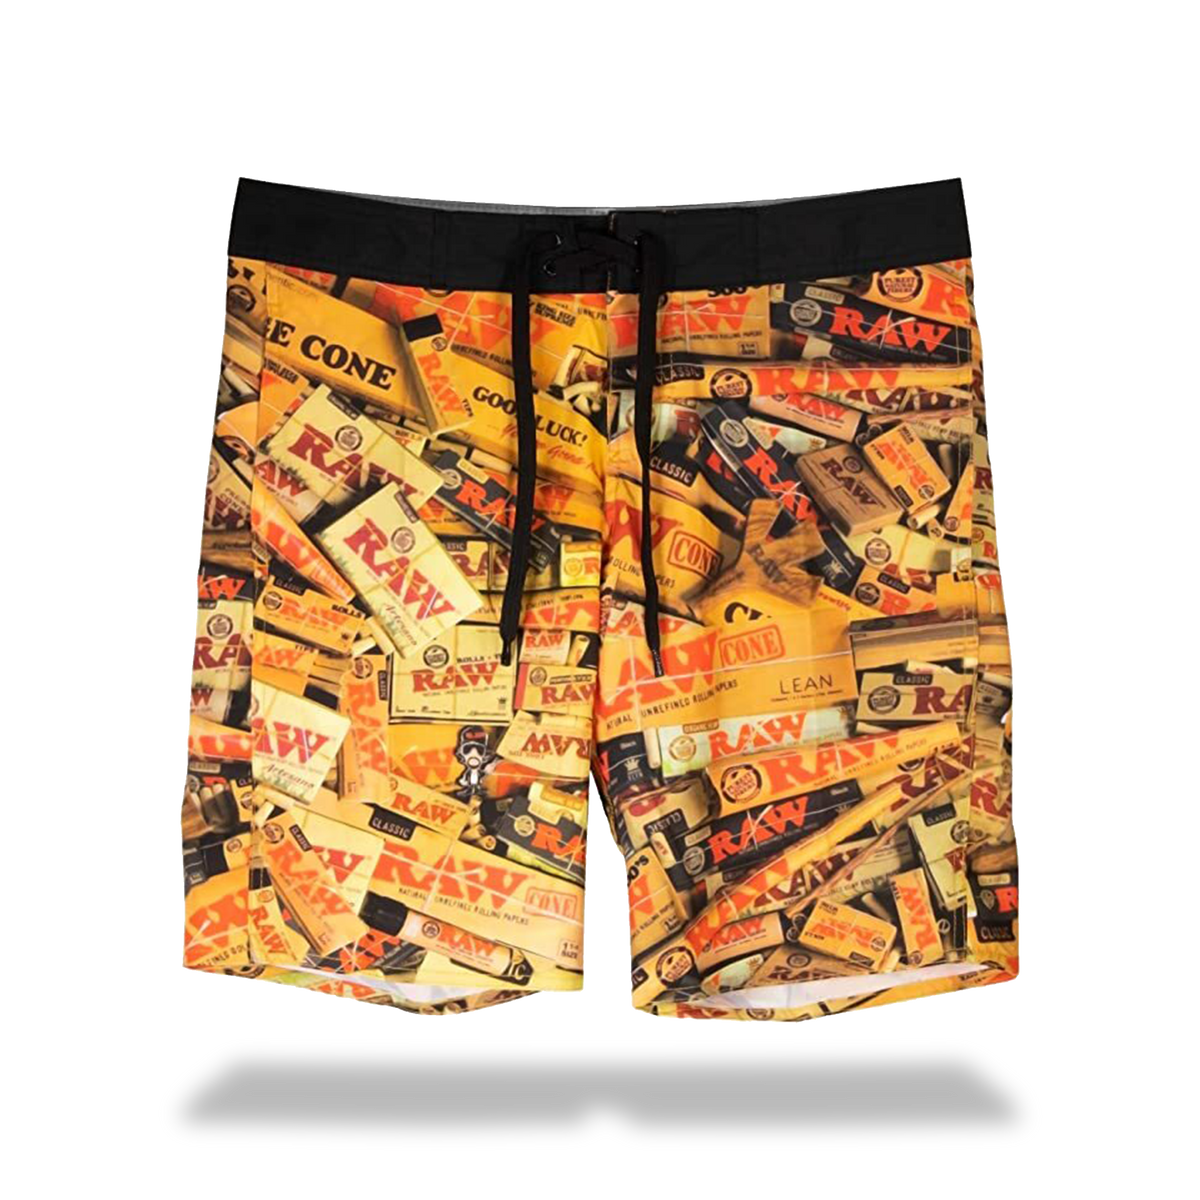 RAW Brazil Board Shorts Clothing Accessories WAR00531-MUSA01 esd-official